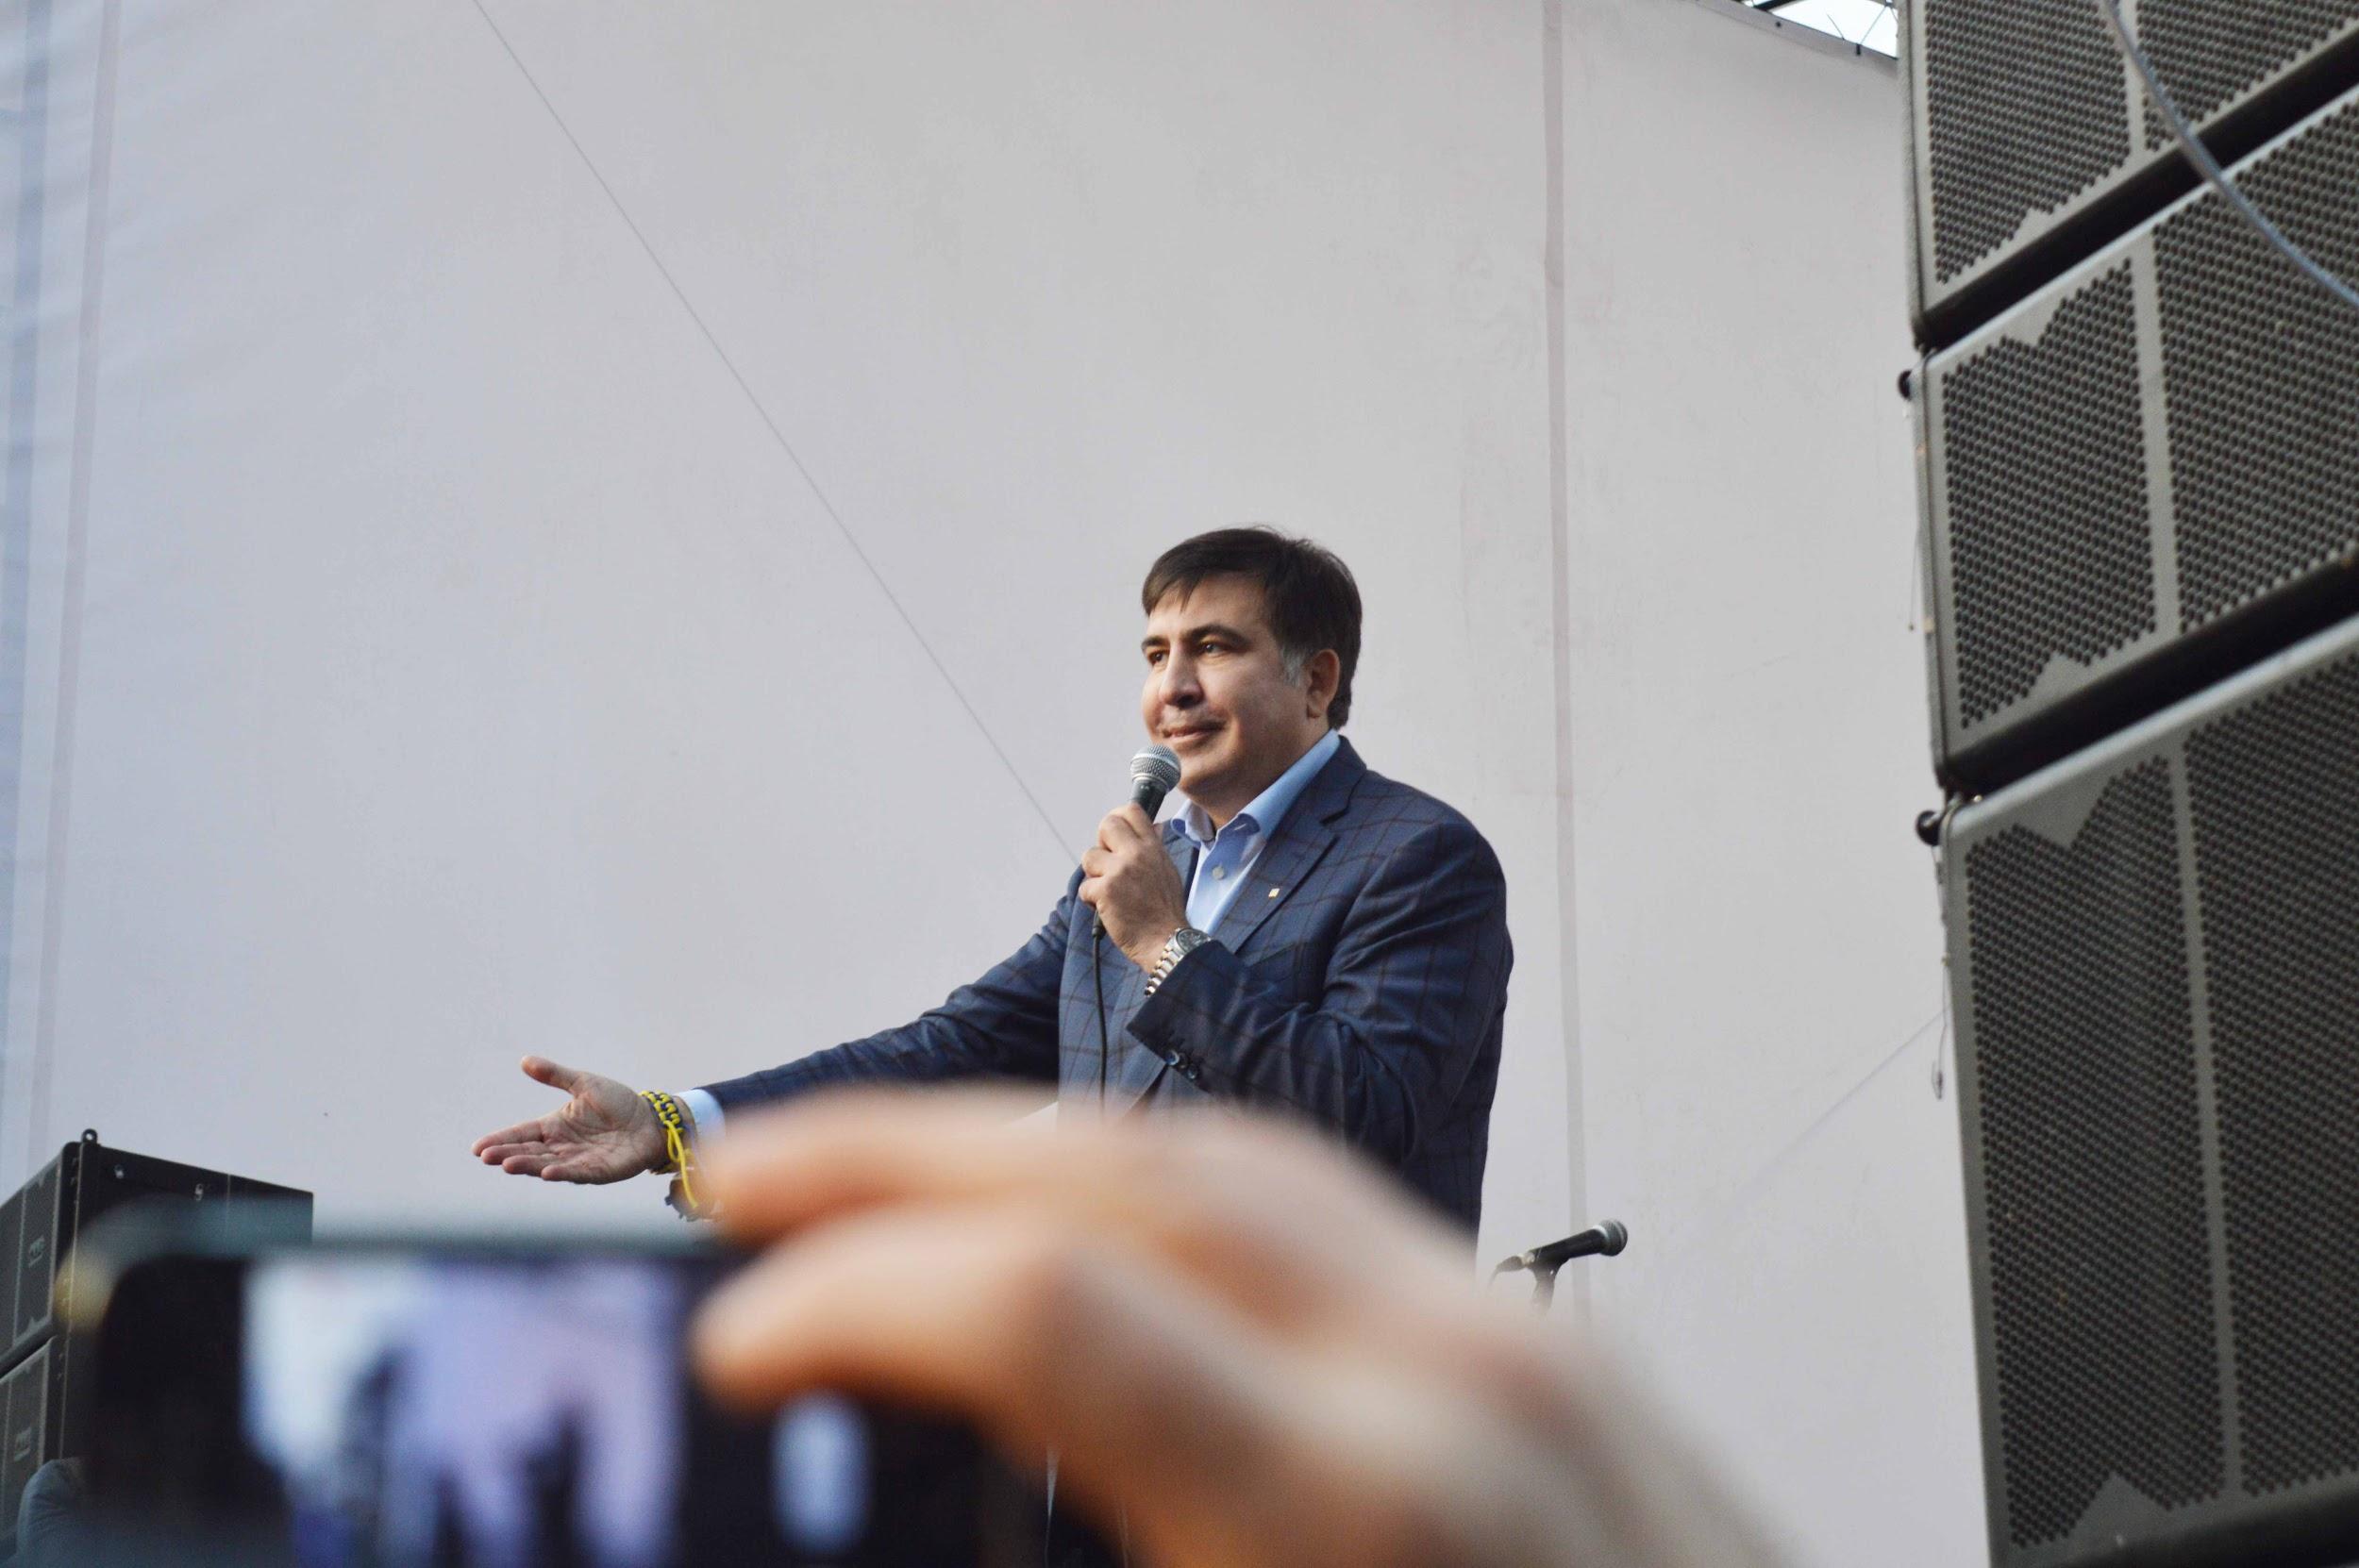 Mikheil Saakashvili: “The difference between Poroshenko and Yanukovych is that nobody was expecting anything good from Yanukovych. But people were expecting good from Poroshenko.” Photo: Olena Makarenko ~